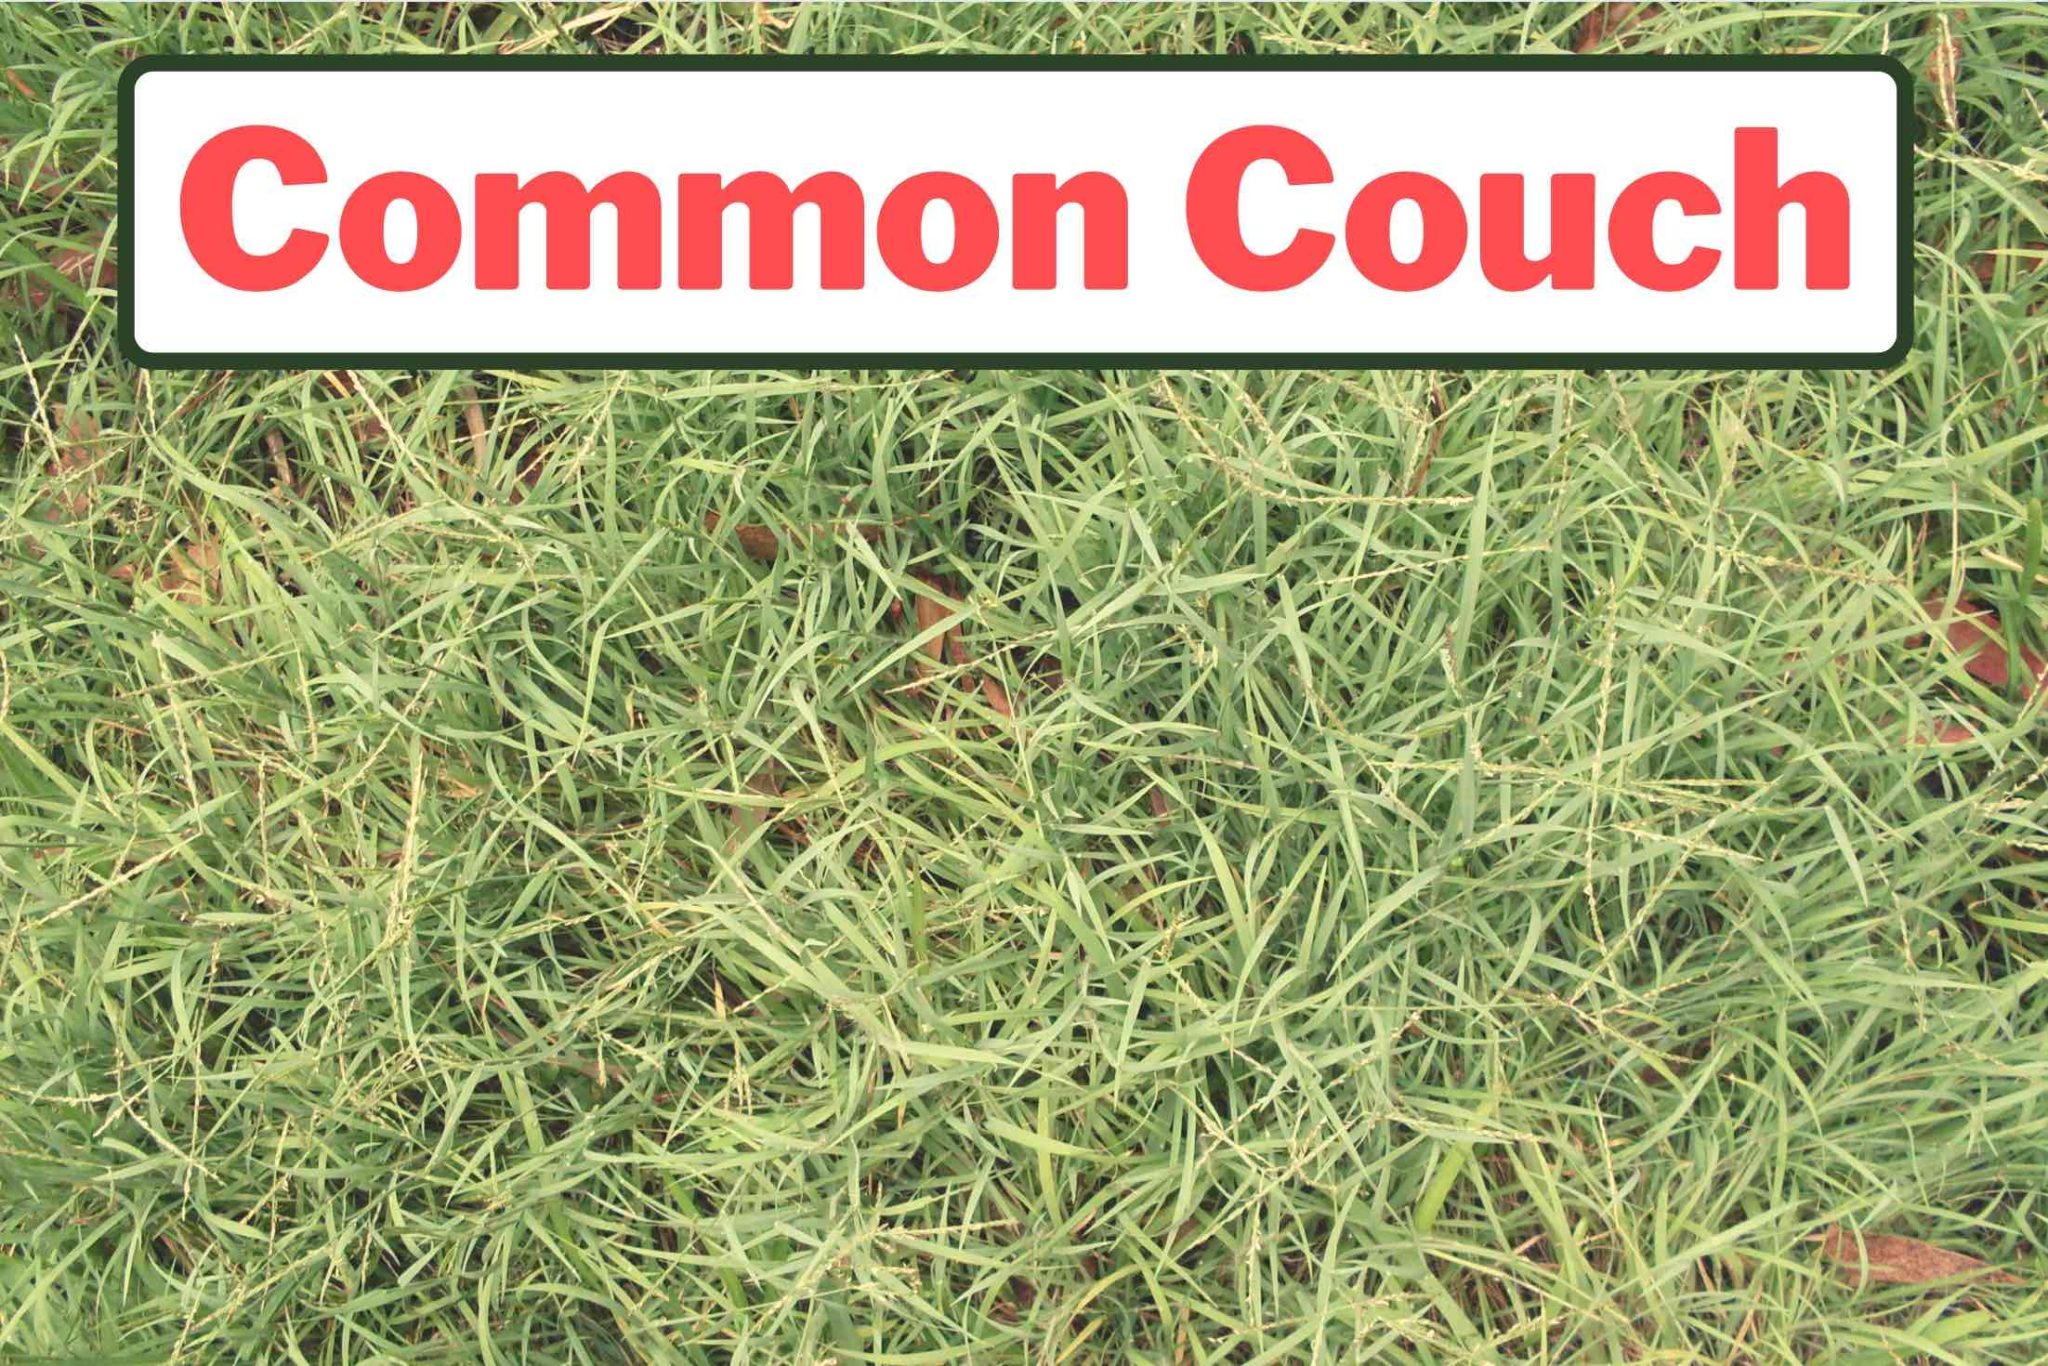 Common Couch Look Like Grass